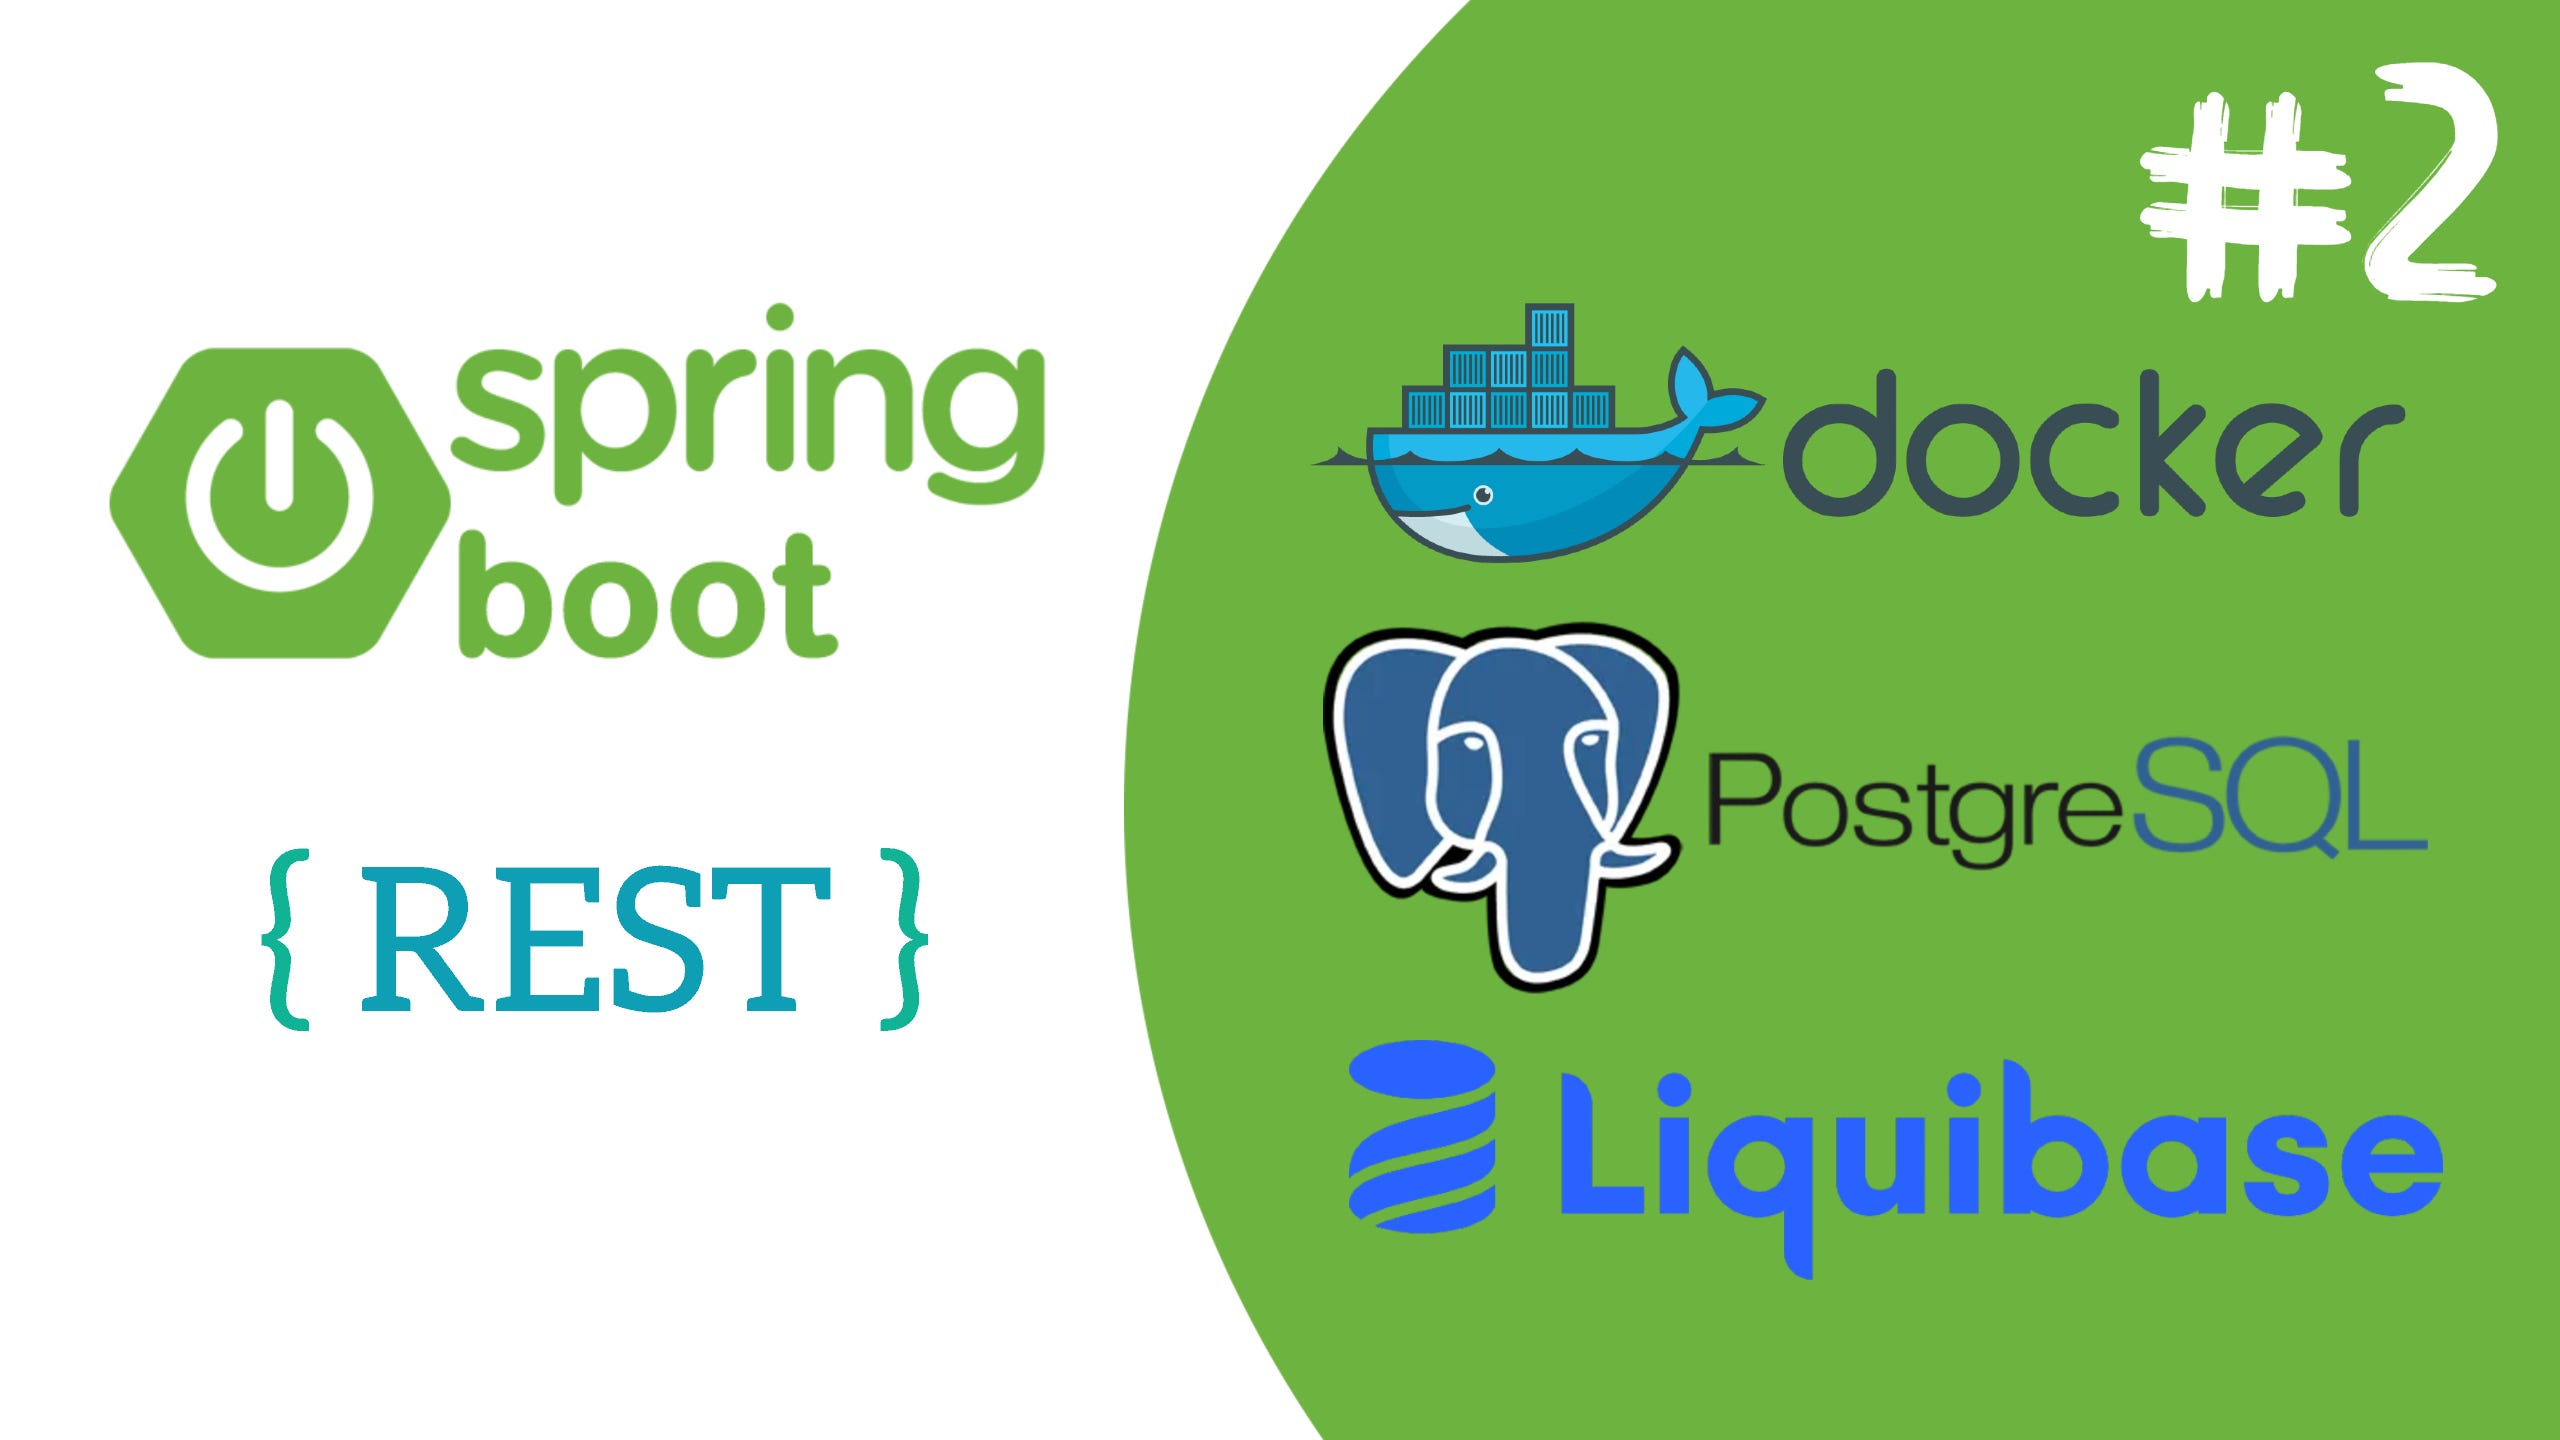 liquibase spring boot example